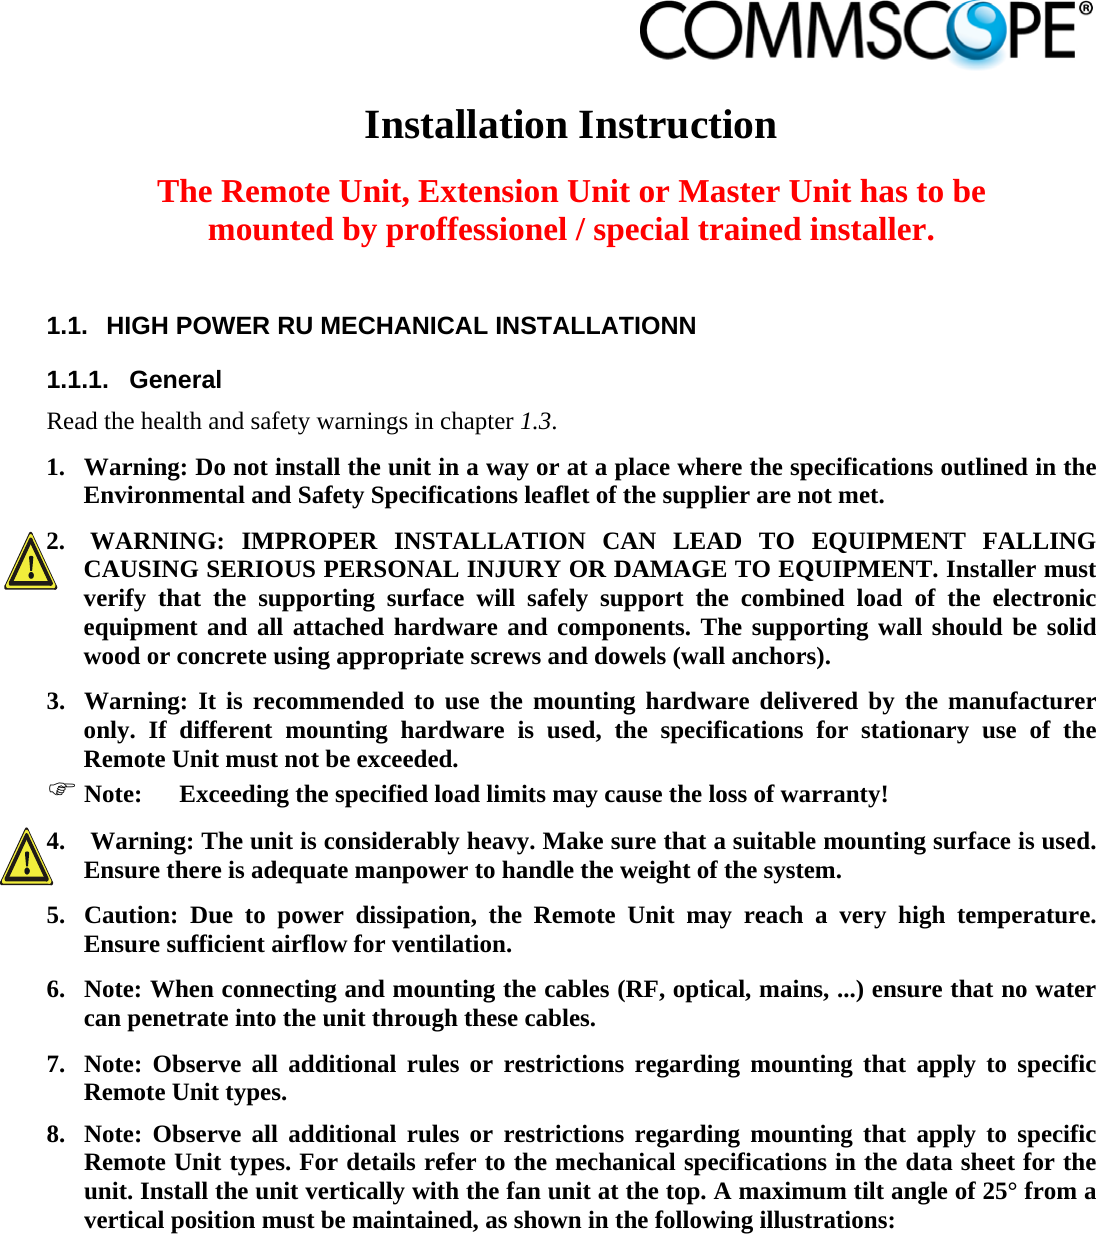                             Installation Instruction  The Remote Unit, Extension Unit or Master Unit has to be mounted by proffessionel / special trained installer.  1.1.  HIGH POWER RU MECHANICAL INSTALLATIONN 1.1.1. General Read the health and safety warnings in chapter 1.3. 1. Warning: Do not install the unit in a way or at a place where the specifications outlined in the Environmental and Safety Specifications leaflet of the supplier are not met. 2.  WARNING: IMPROPER INSTALLATION CAN LEAD TO EQUIPMENT FALLING CAUSING SERIOUS PERSONAL INJURY OR DAMAGE TO EQUIPMENT. Installer must verify that the supporting surface will safely support the combined load of the electronic equipment and all attached hardware and components. The supporting wall should be solid wood or concrete using appropriate screws and dowels (wall anchors). 3. Warning: It is recommended to use the mounting hardware delivered by the manufacturer only. If different mounting hardware is used, the specifications for stationary use of the Remote Unit must not be exceeded.  Note:  Exceeding the specified load limits may cause the loss of warranty! 4.  Warning: The unit is considerably heavy. Make sure that a suitable mounting surface is used. Ensure there is adequate manpower to handle the weight of the system. 5. Caution: Due to power dissipation, the Remote Unit may reach a very high temperature. Ensure sufficient airflow for ventilation. 6. Note: When connecting and mounting the cables (RF, optical, mains, ...) ensure that no water can penetrate into the unit through these cables. 7. Note: Observe all additional rules or restrictions regarding mounting that apply to specific Remote Unit types. 8. Note: Observe all additional rules or restrictions regarding mounting that apply to specific Remote Unit types. For details refer to the mechanical specifications in the data sheet for the unit. Install the unit vertically with the fan unit at the top. A maximum tilt angle of 25° from a vertical position must be maintained, as shown in the following illustrations:  